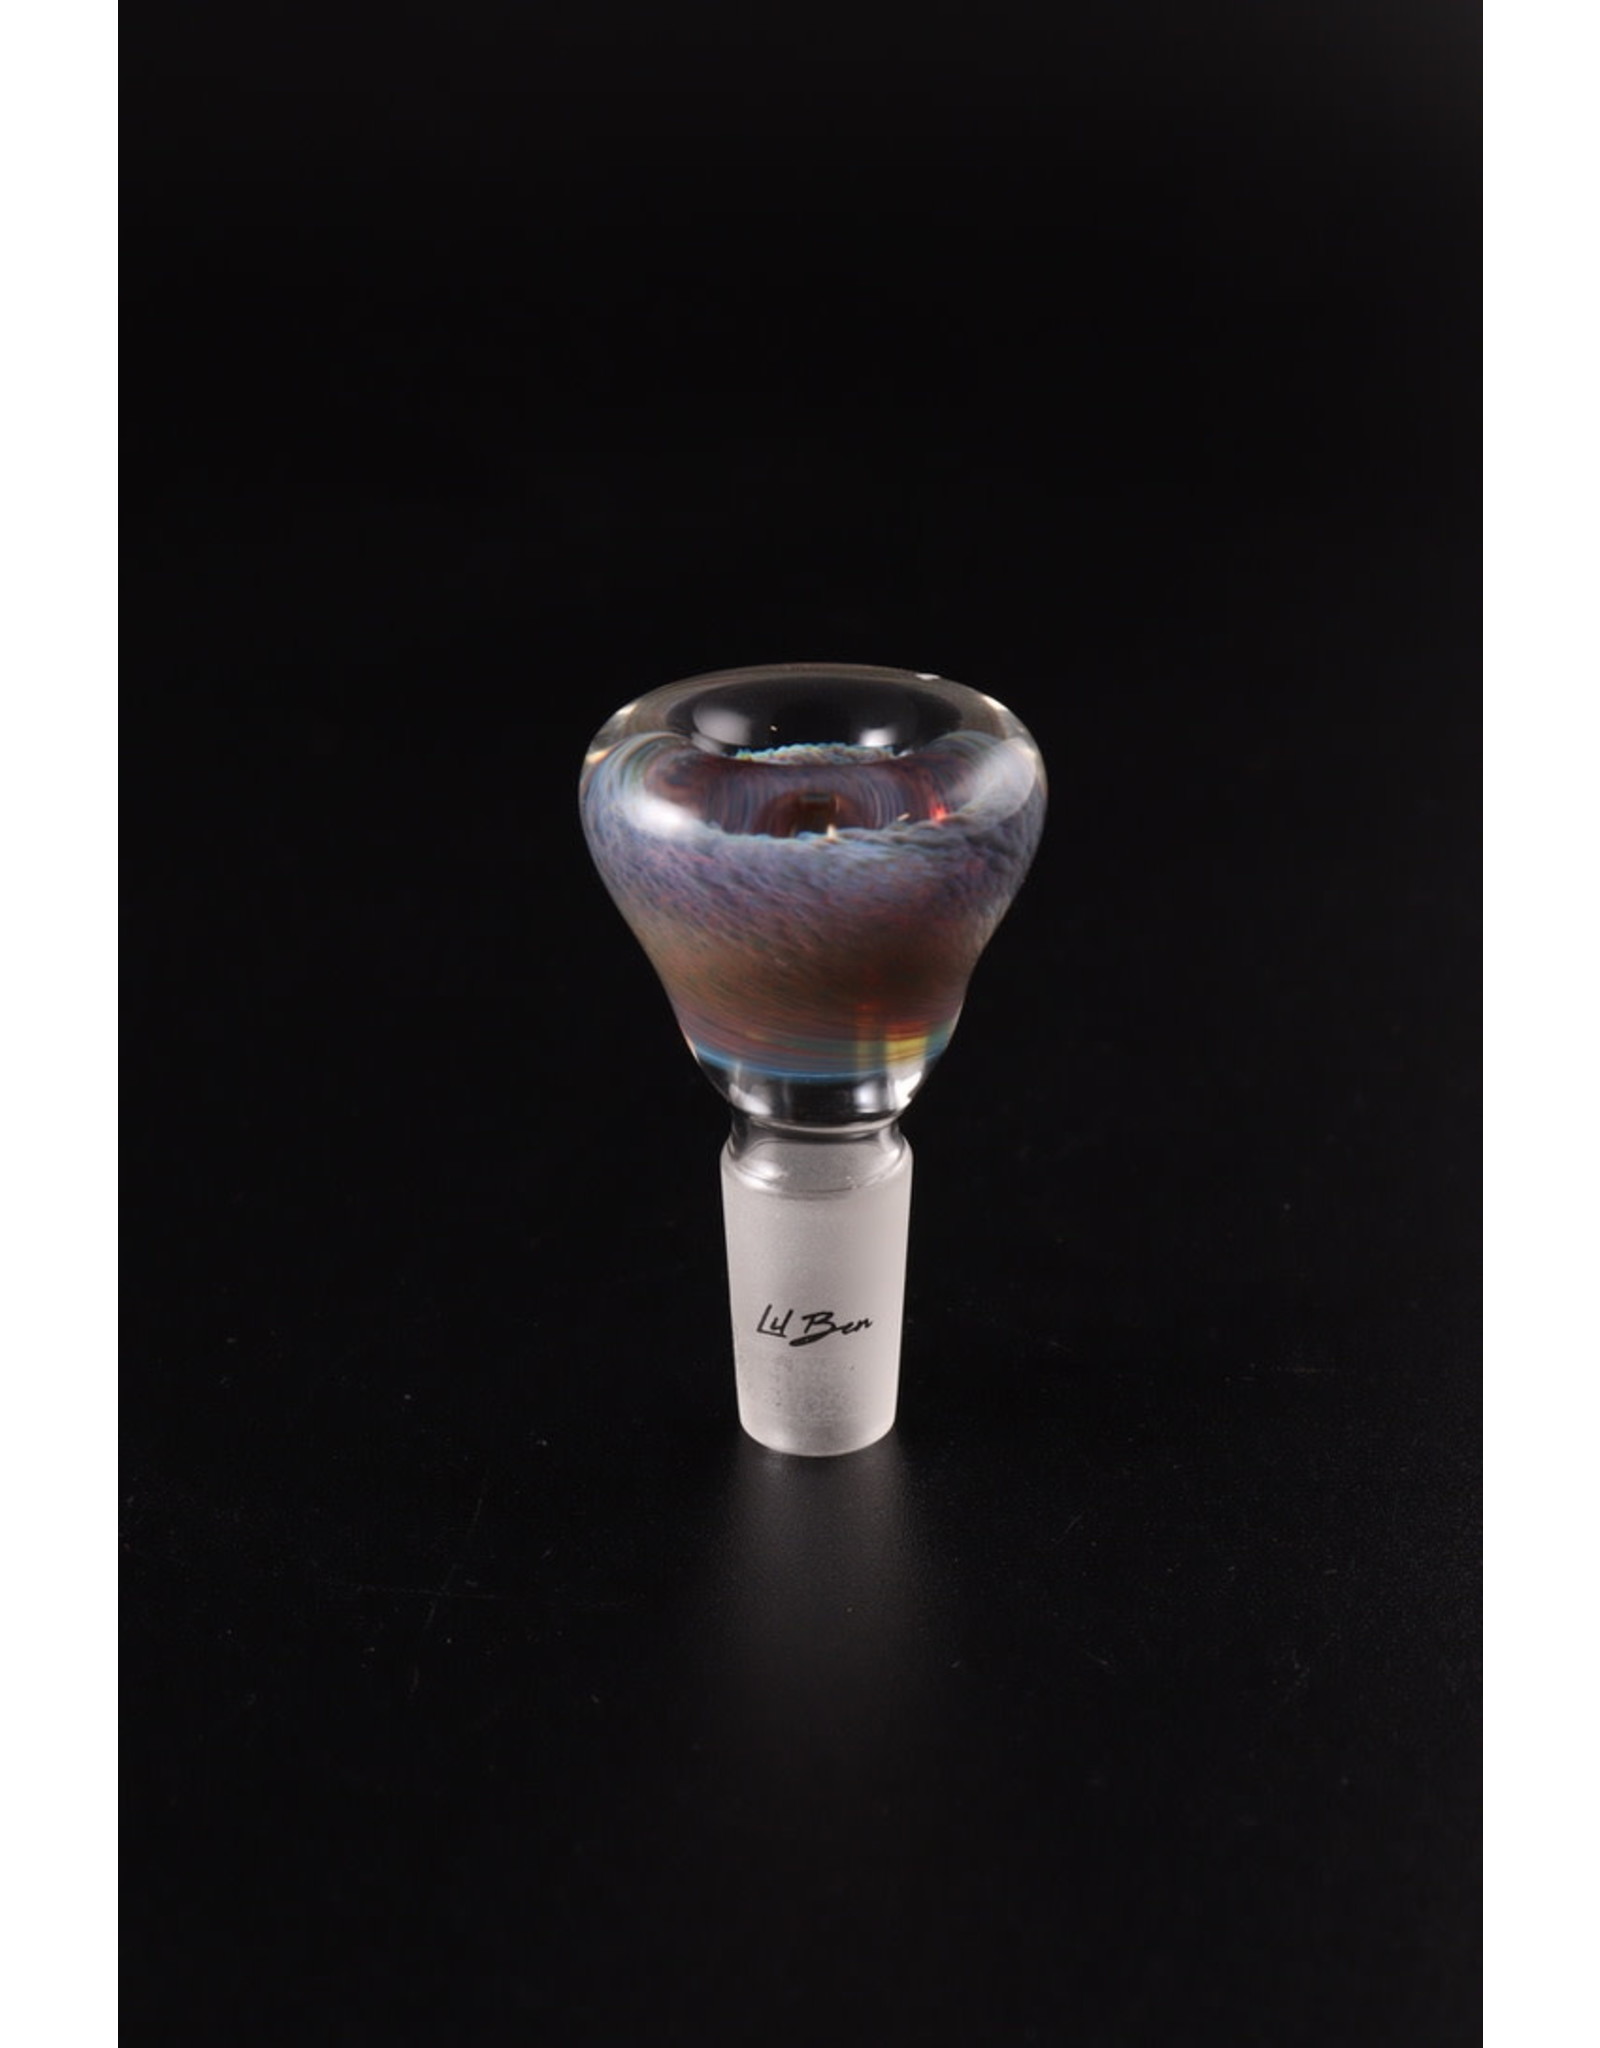 Lil Ben $27.50 14mm Male GonG Bowl